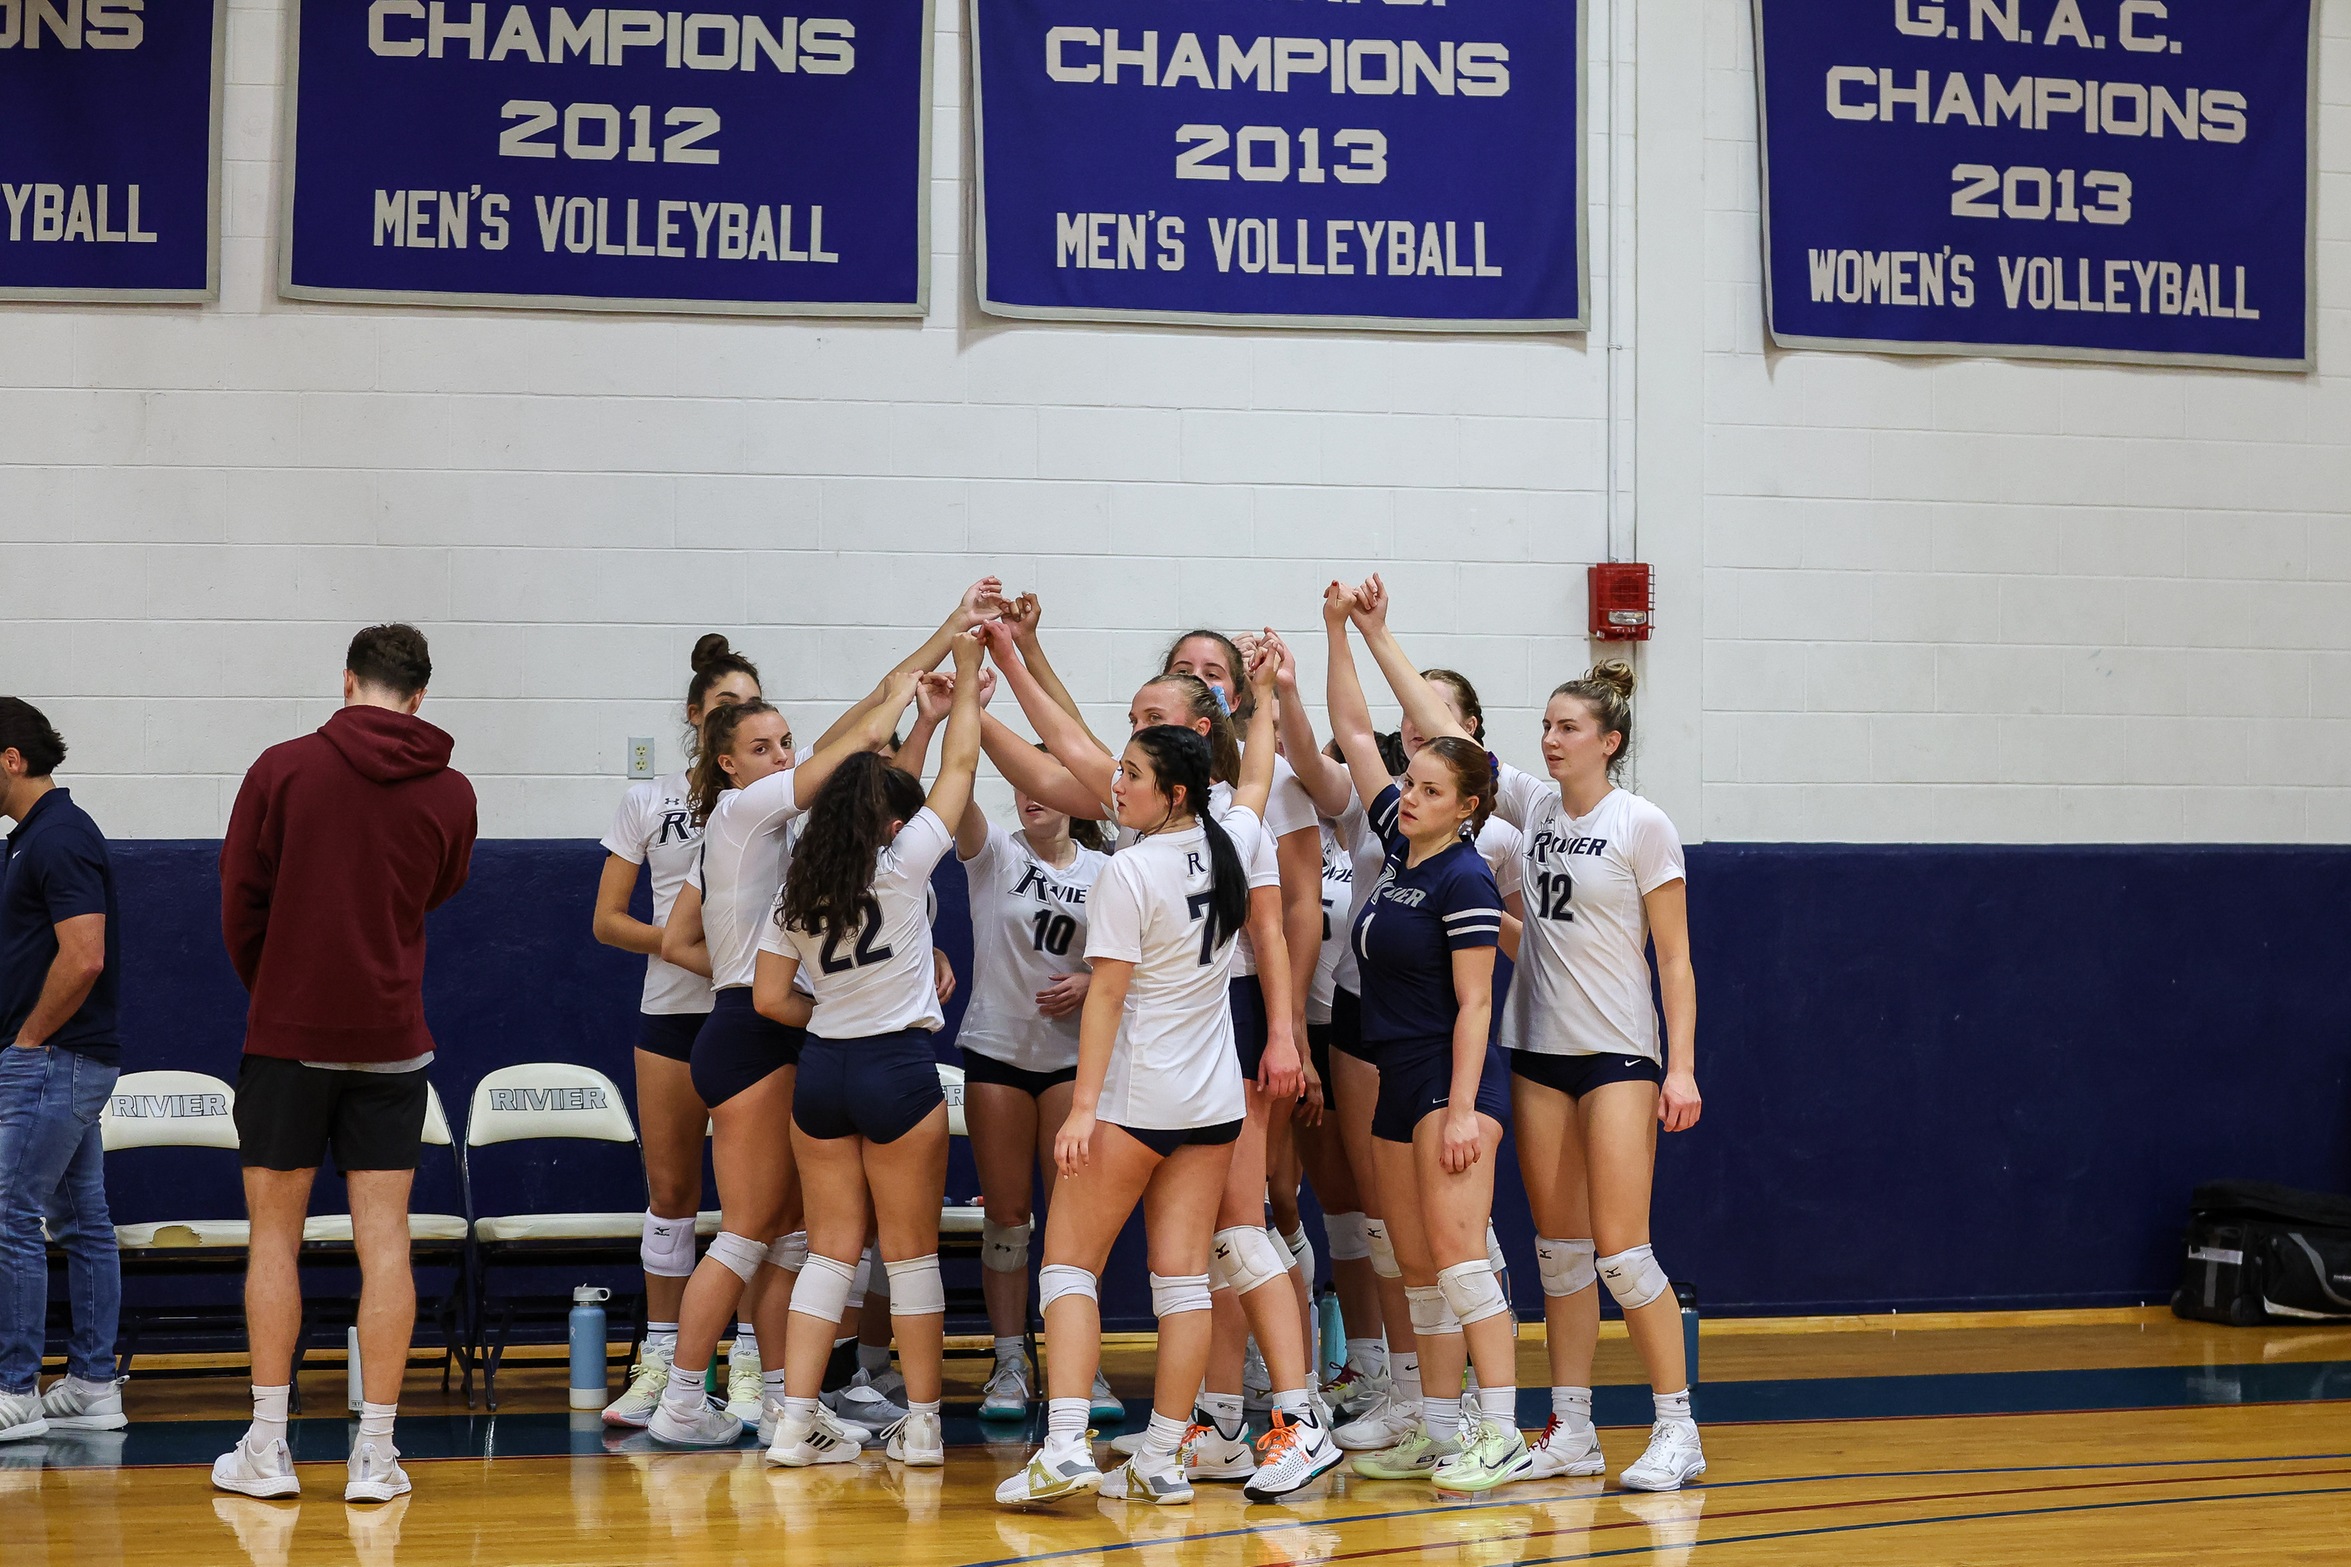 Women’s Volleyball Stunned by Sharks in Semifinals